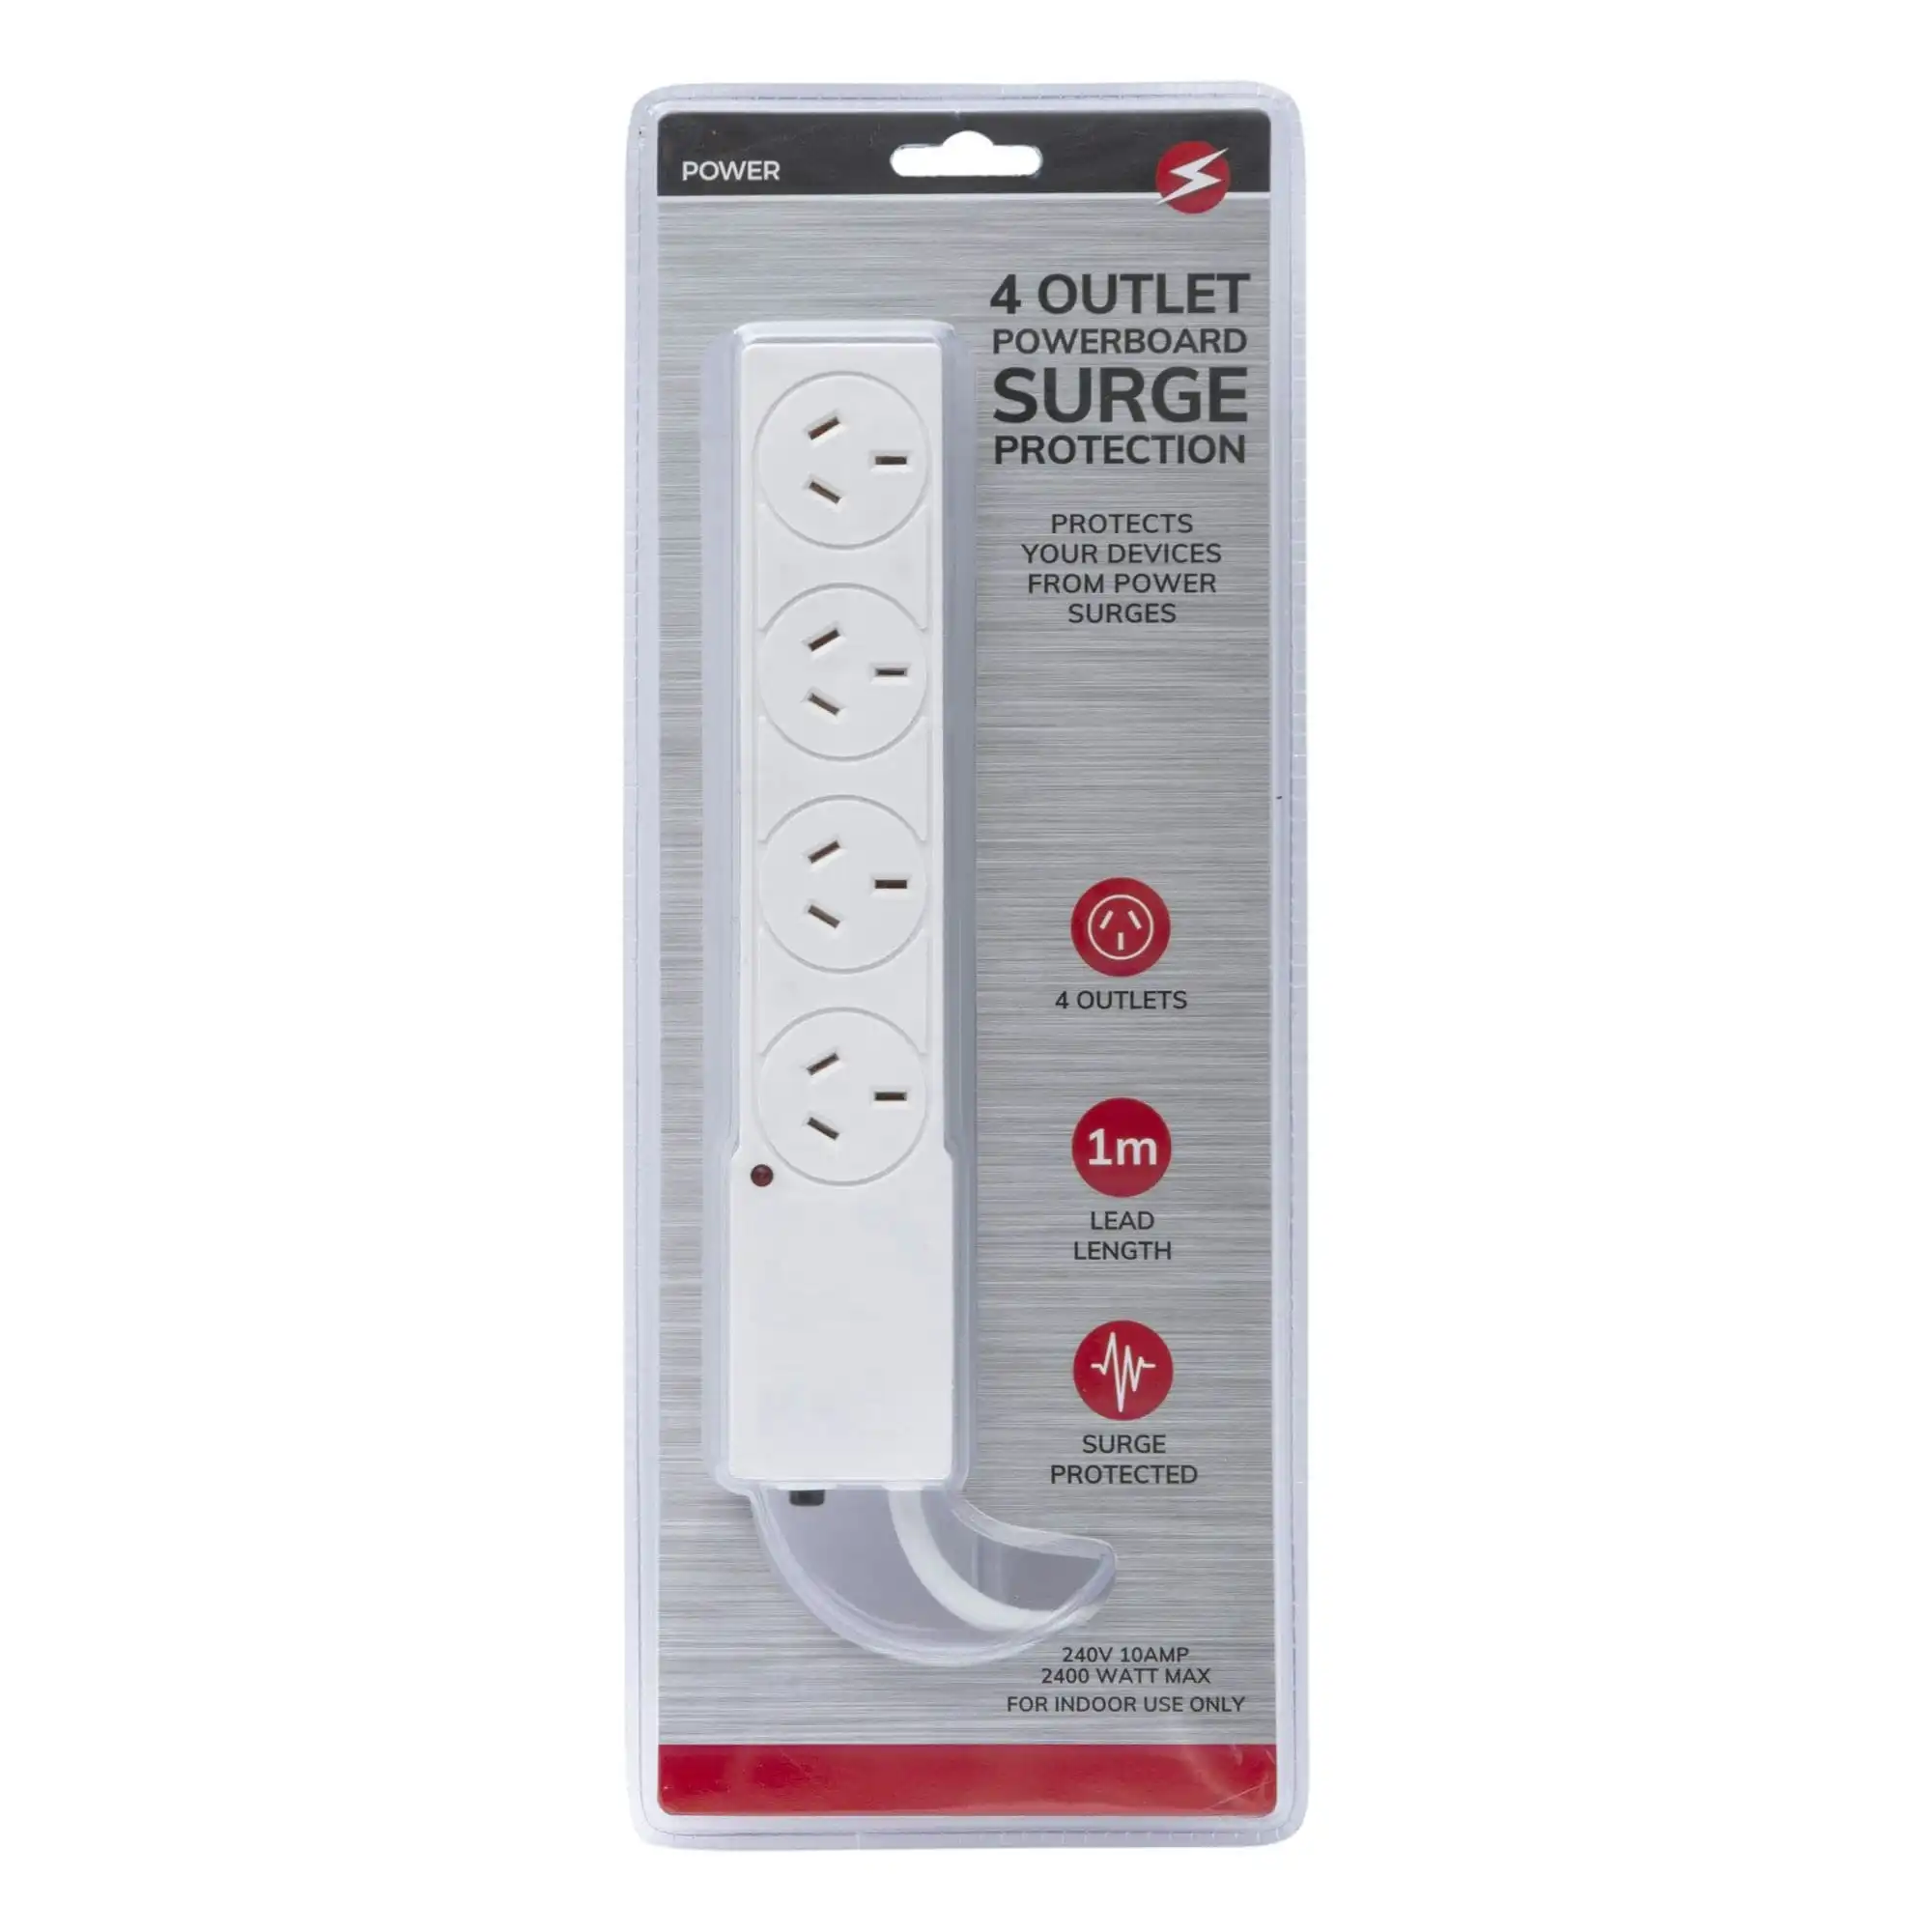 4 Outlet Powerboard With Surge Protection 1M Lead Cable